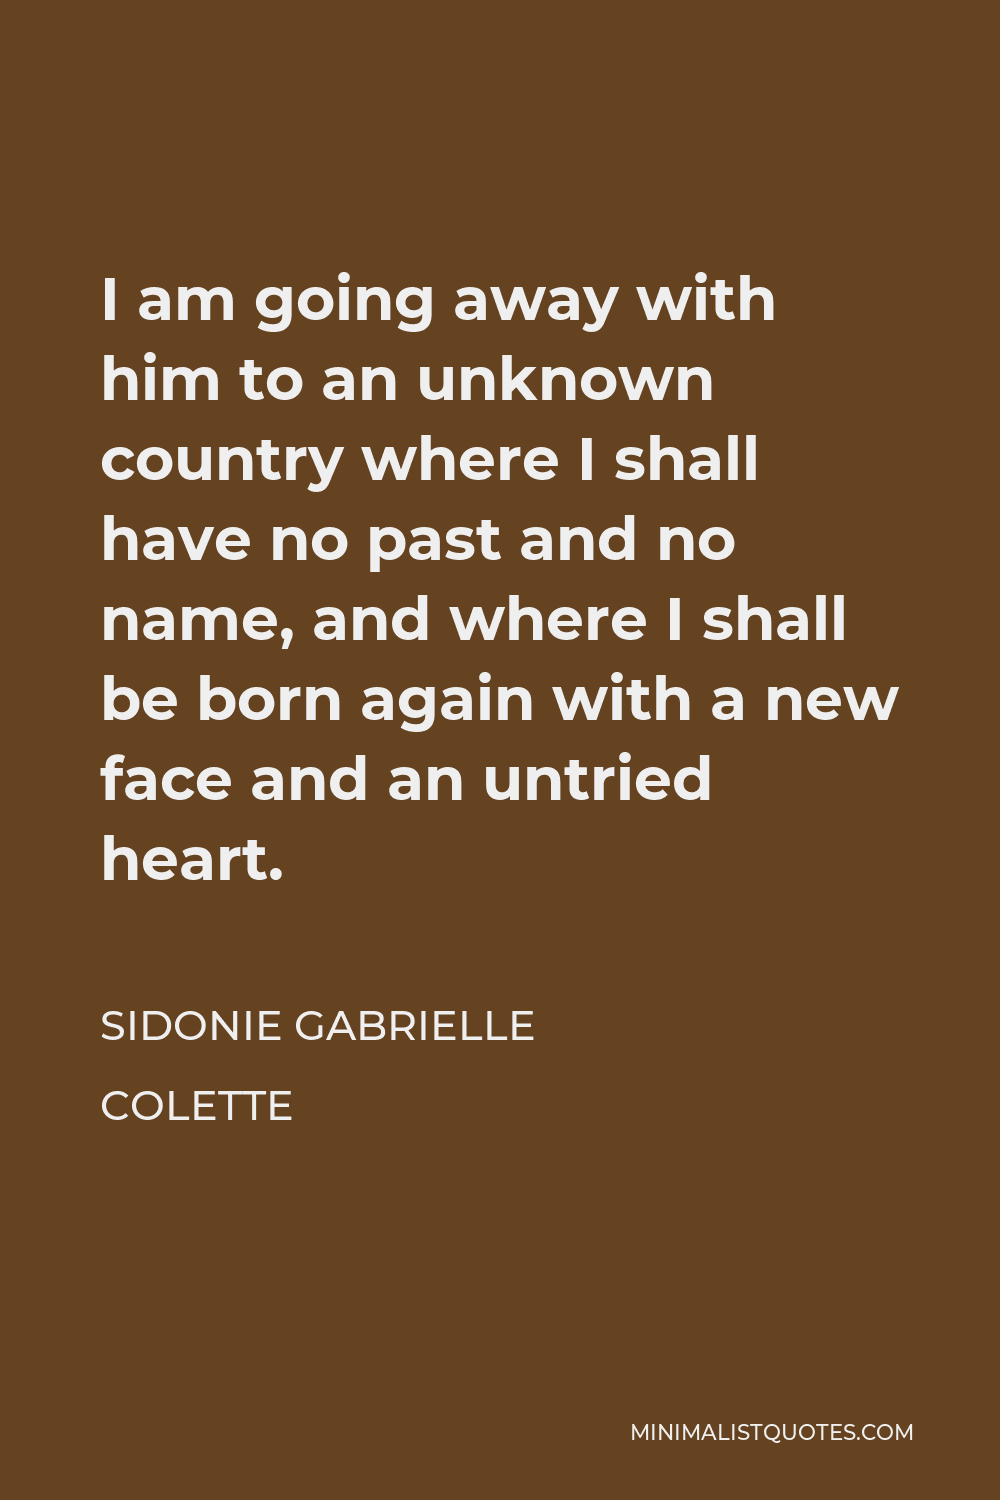 Sidonie Gabrielle Colette Quote - I am going away with him to an unknown country where I shall have no past and no name, and where I shall be born again with a new face and an untried heart.